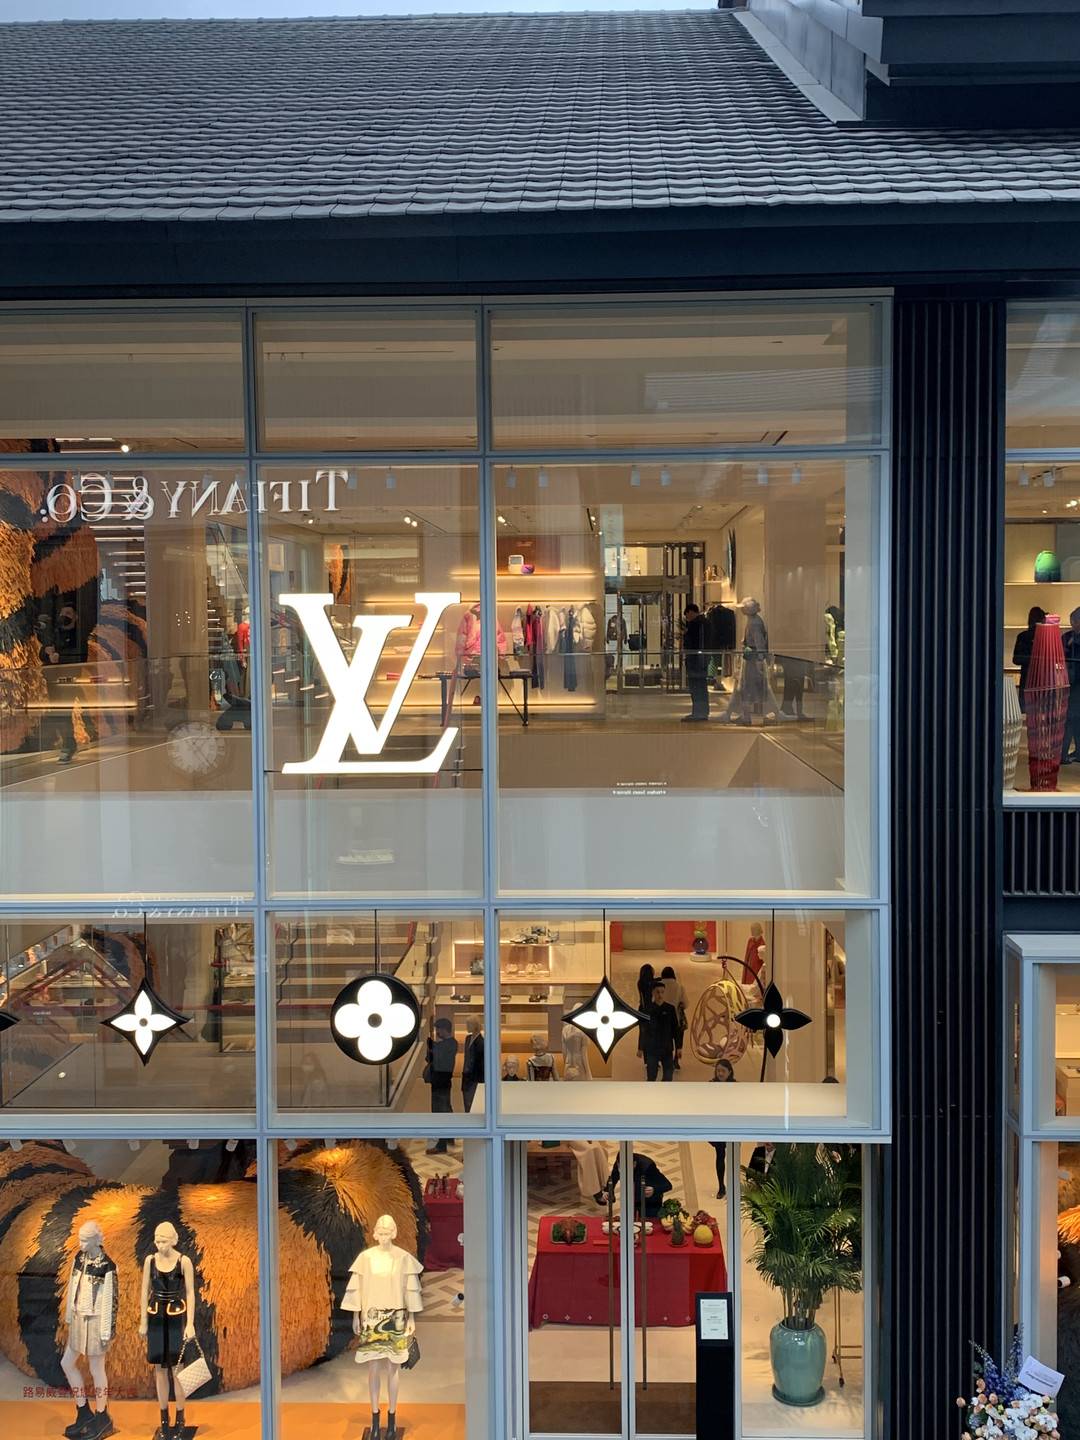 Louis Vuitton on X: Vibrant traditions. Situated in the heart of the city  center at Sino-Ocean Taikoo Li, the newly opened Chengdu flagship store  embodies #LouisVuitton's Art de Vivre and heritage, while